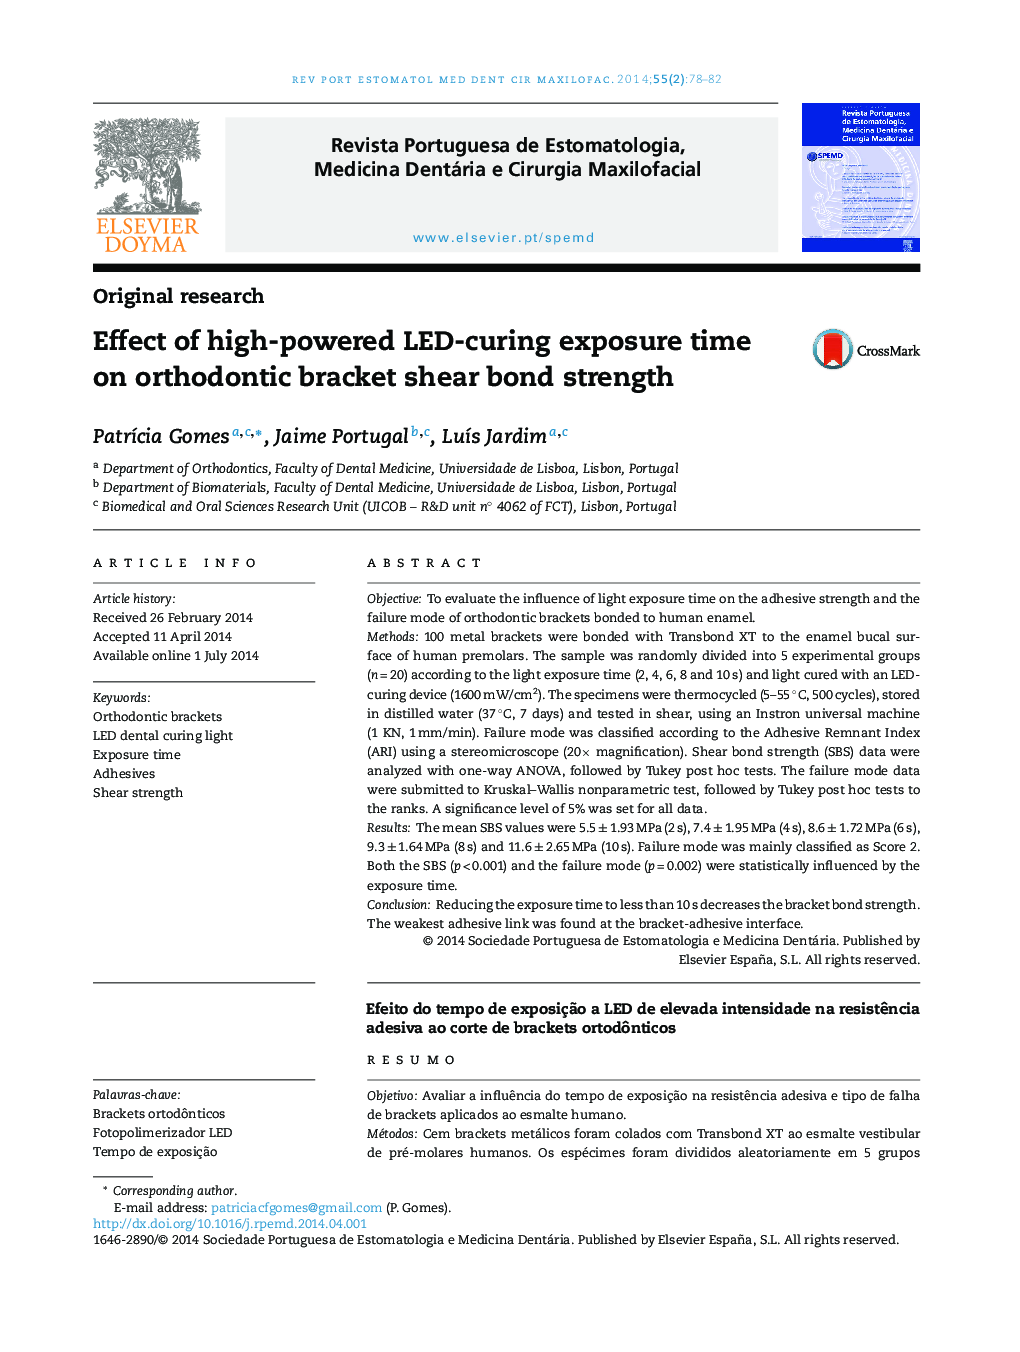 Effect of high-powered LED-curing exposure time on orthodontic bracket shear bond strength